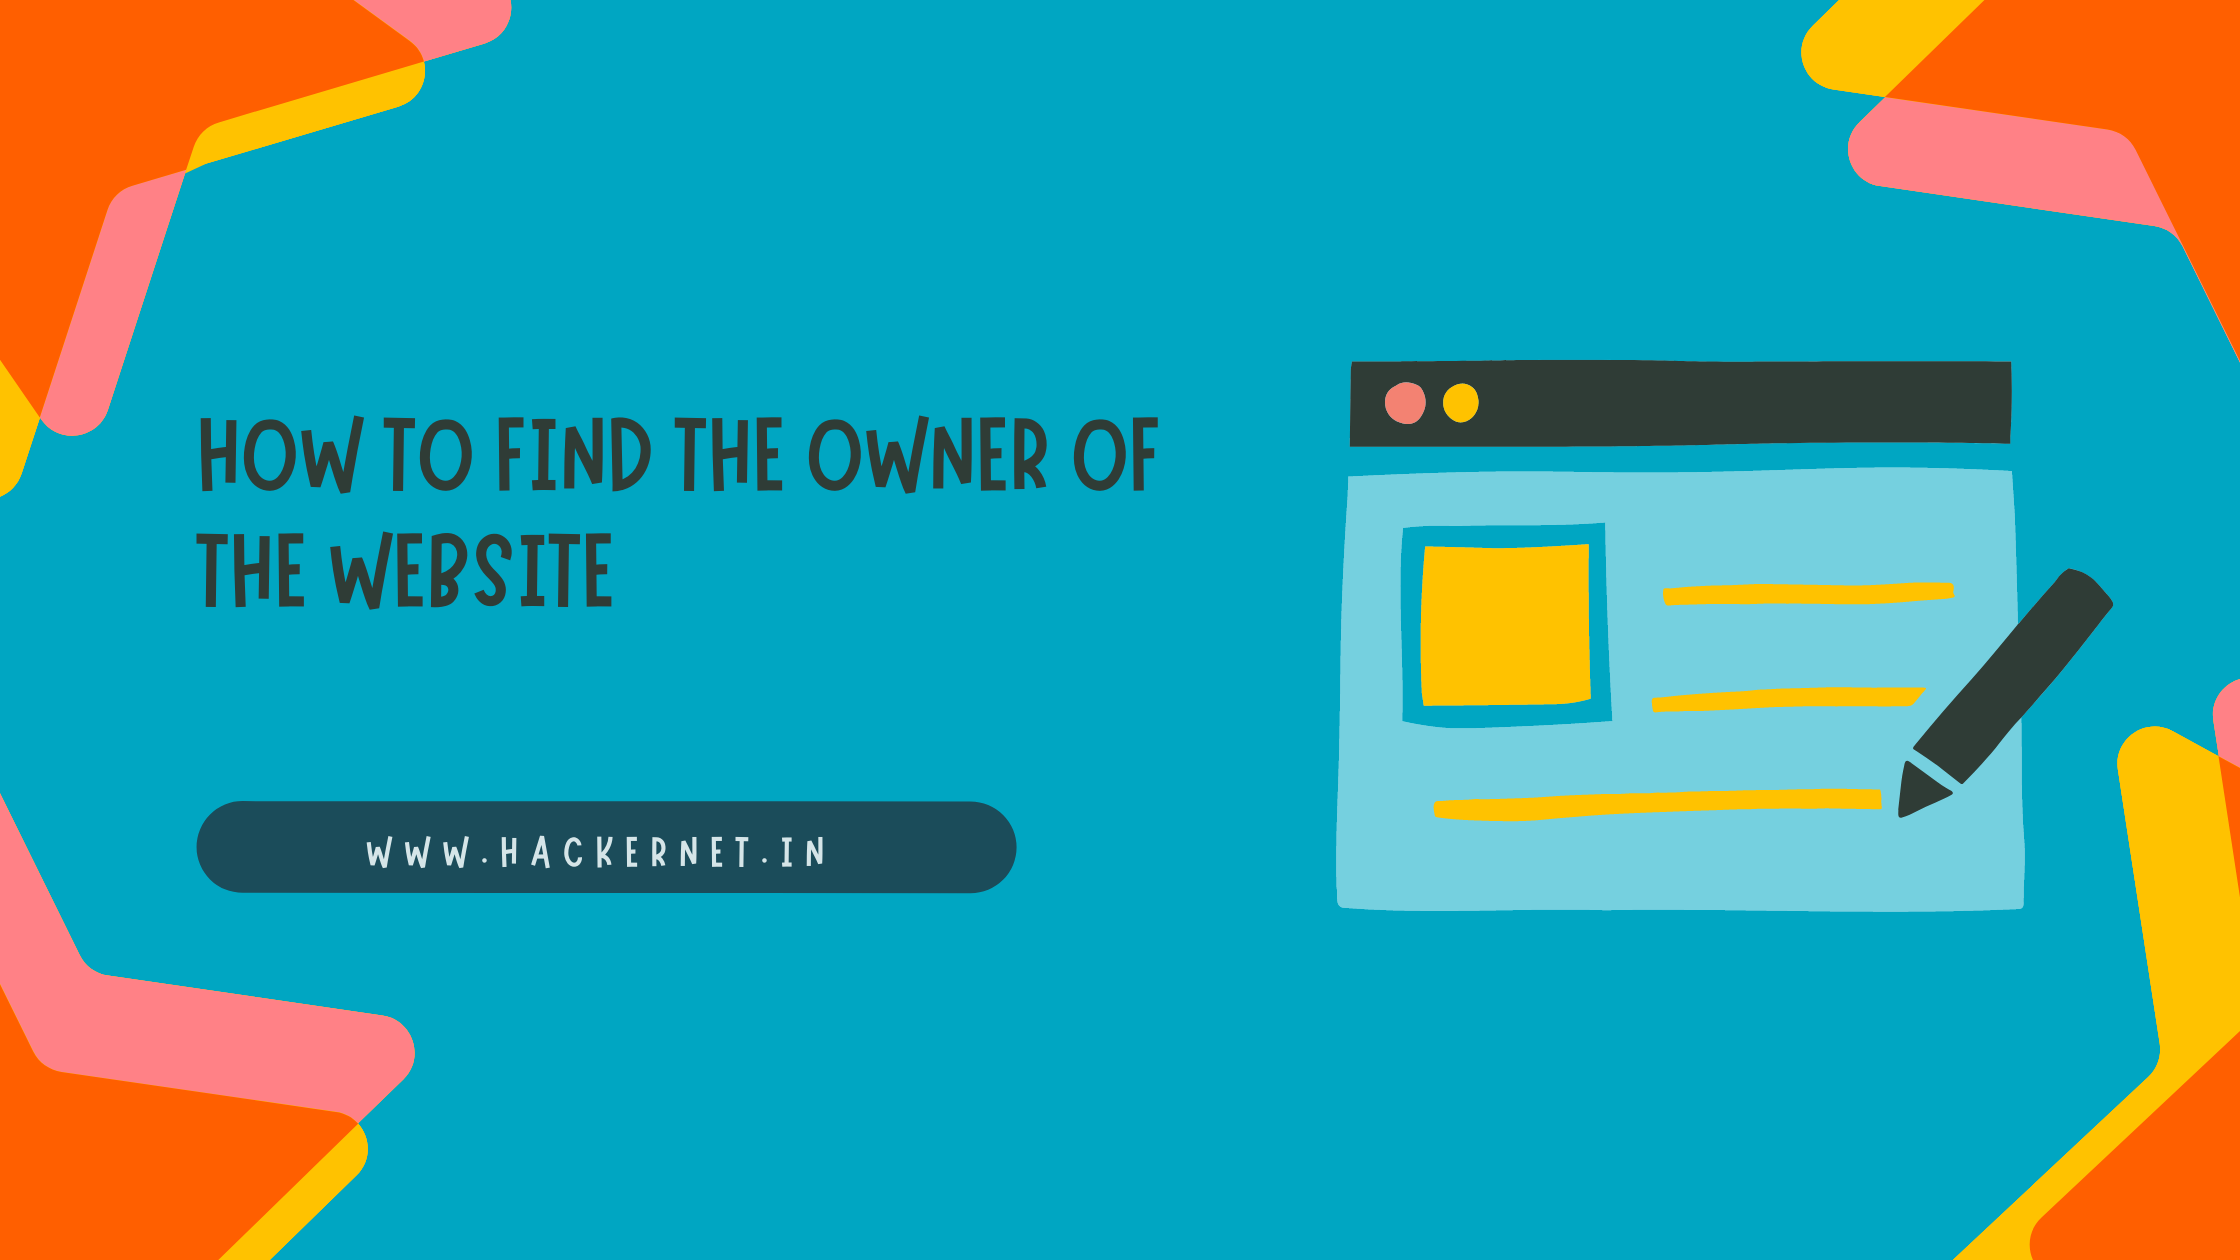 How to Find the owner of The Website - HackerNet.in